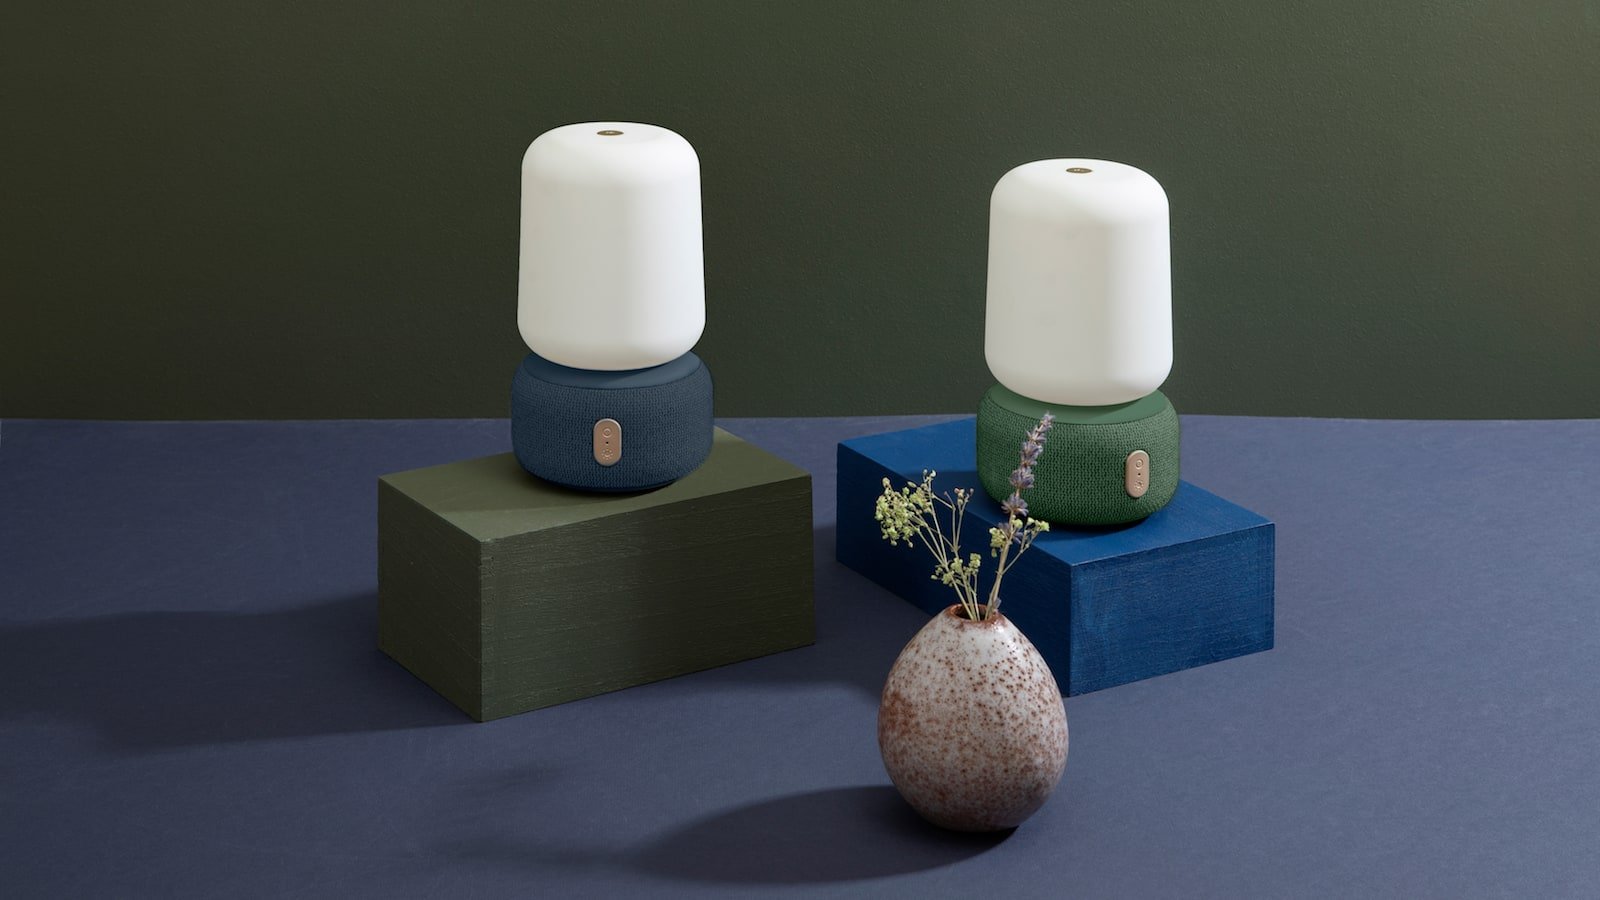 aLOOMI chic lantern and speaker offers a cozy ambiance indoors or outdoors and plays music